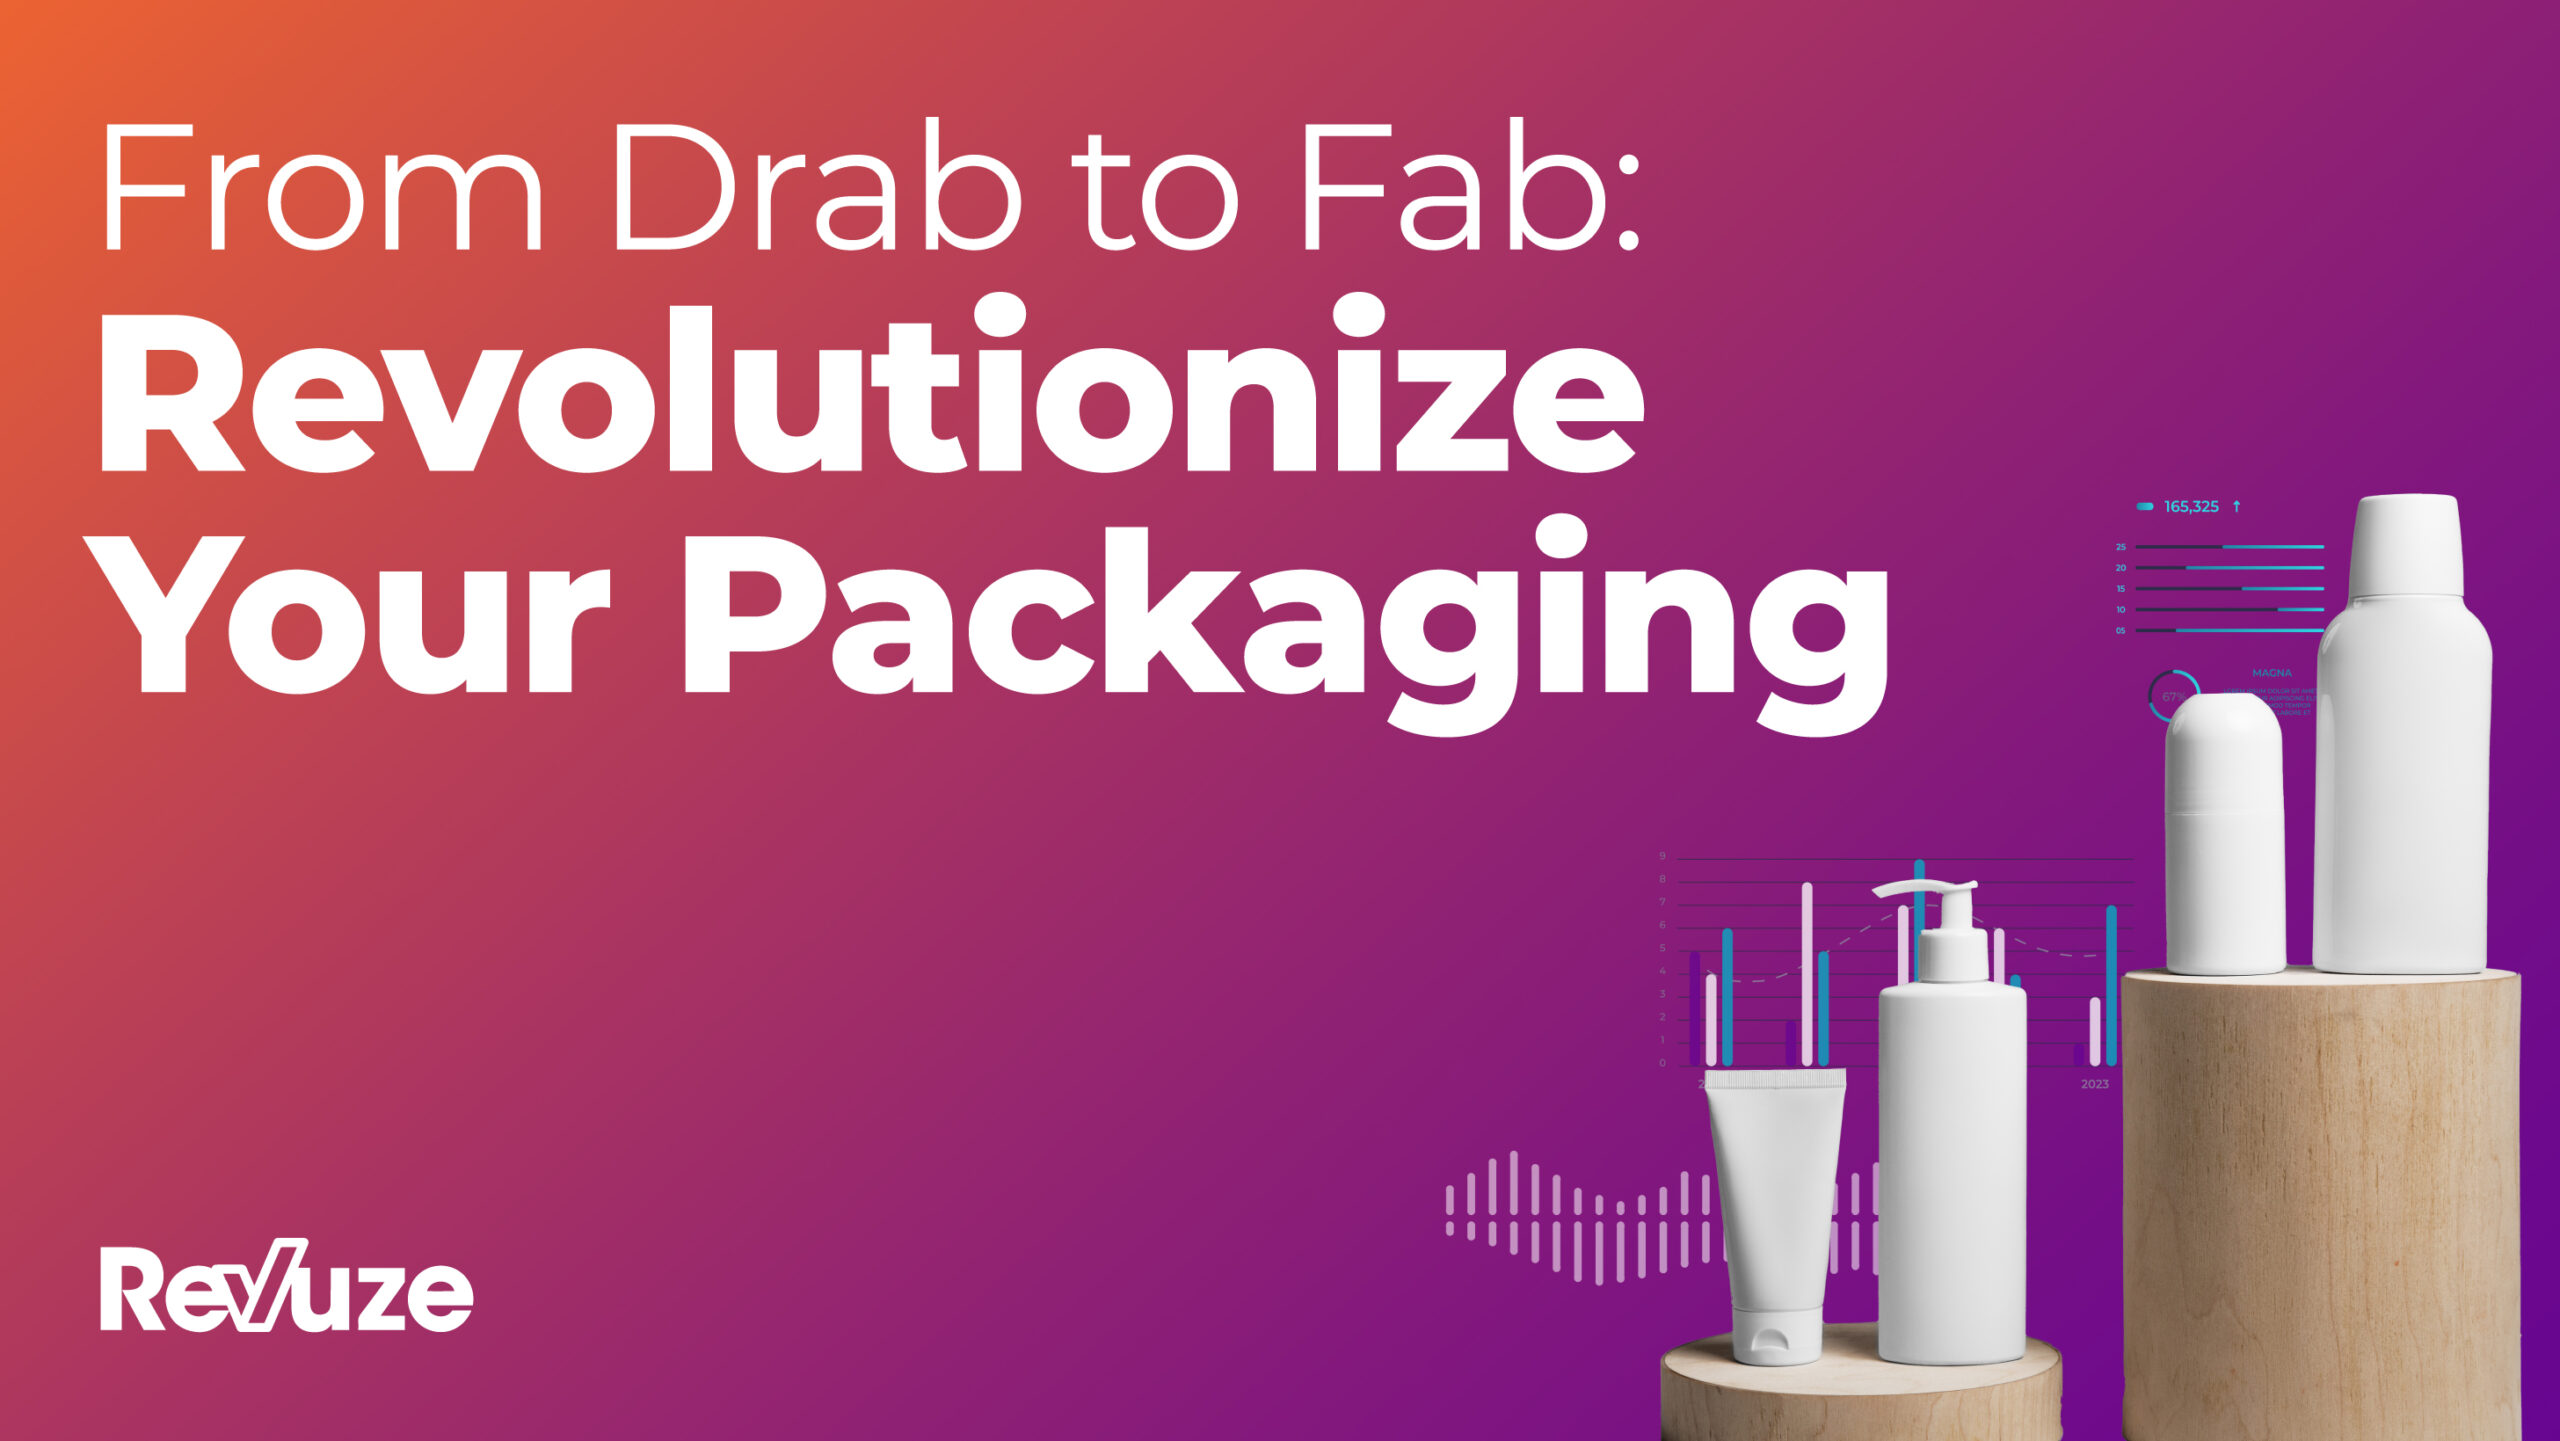 From Drab to Fab: Revolutionize Your Packaging